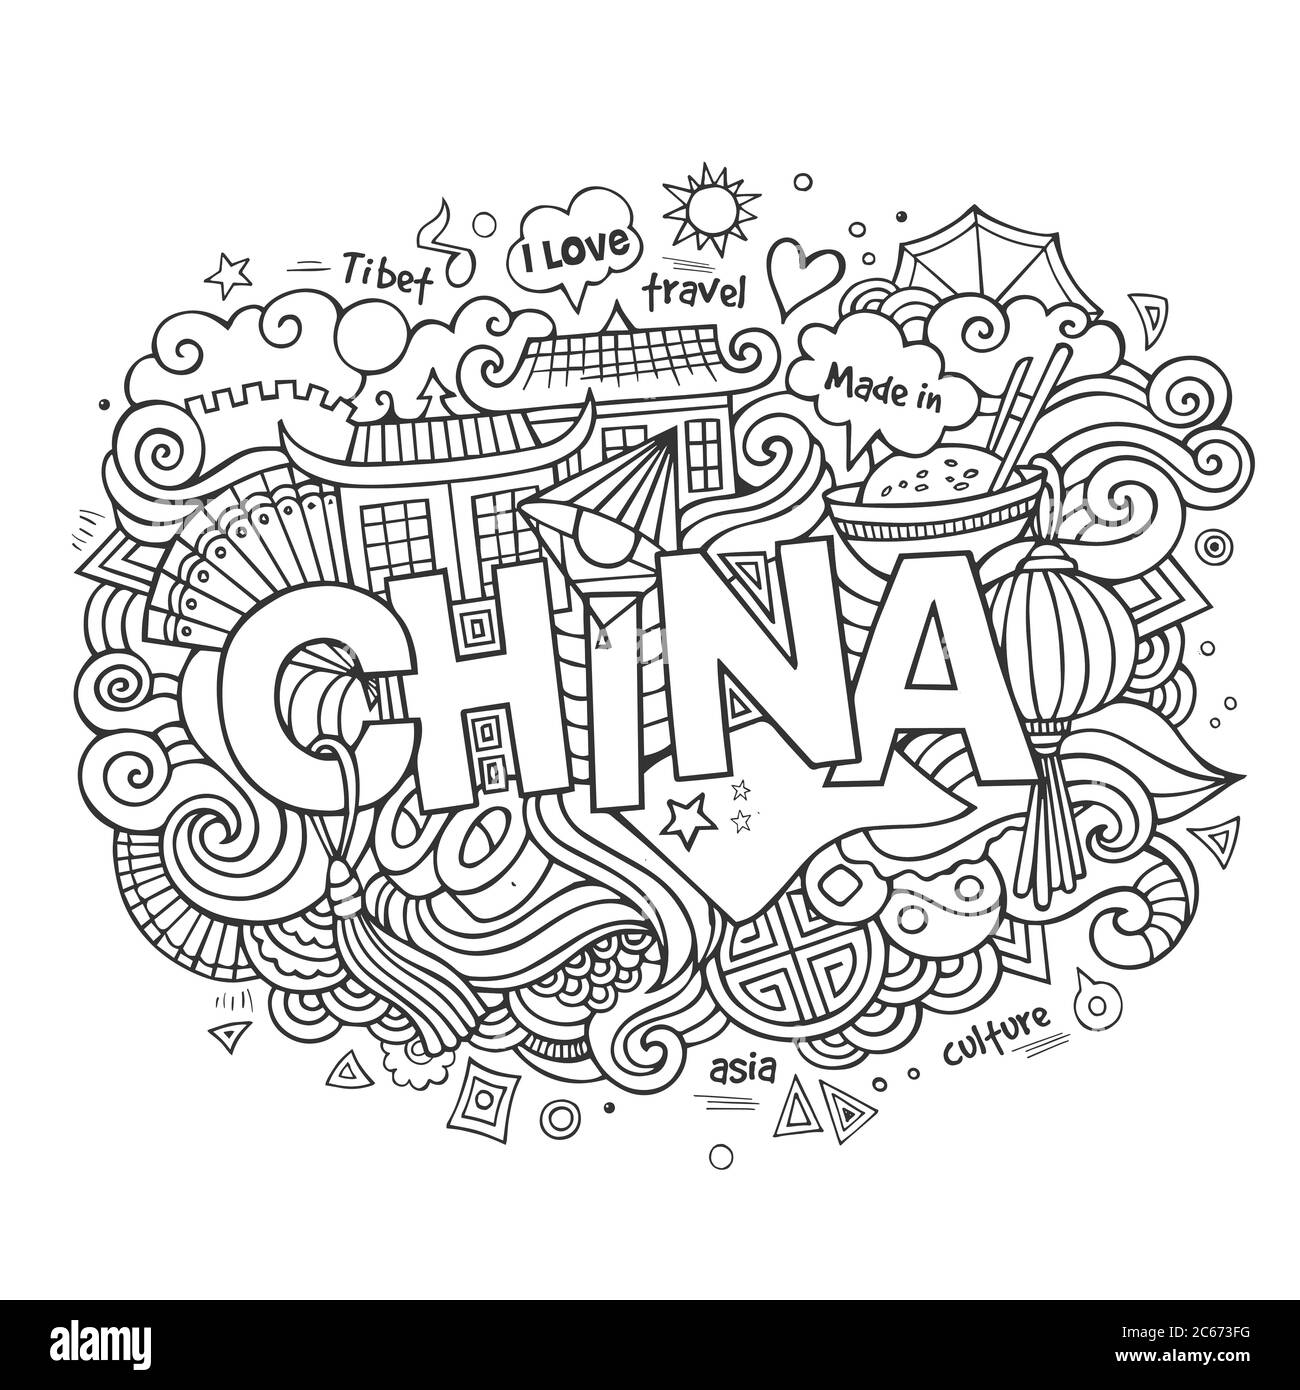 China hand lettering and doodles elements background Stock Vector